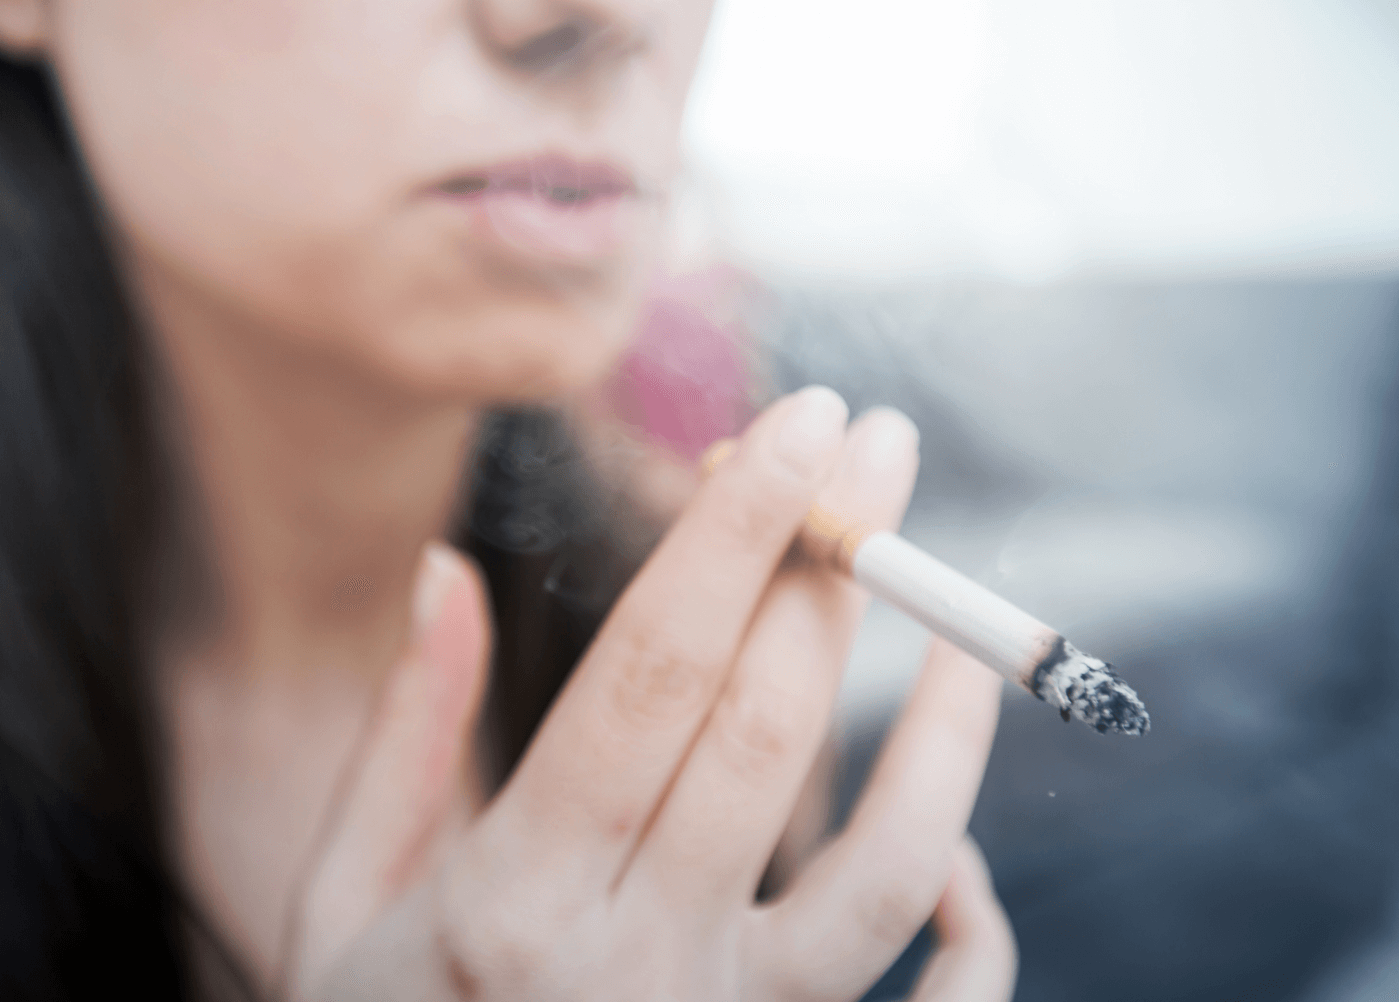 How Quickly Can a Nicotine Addiction Develop